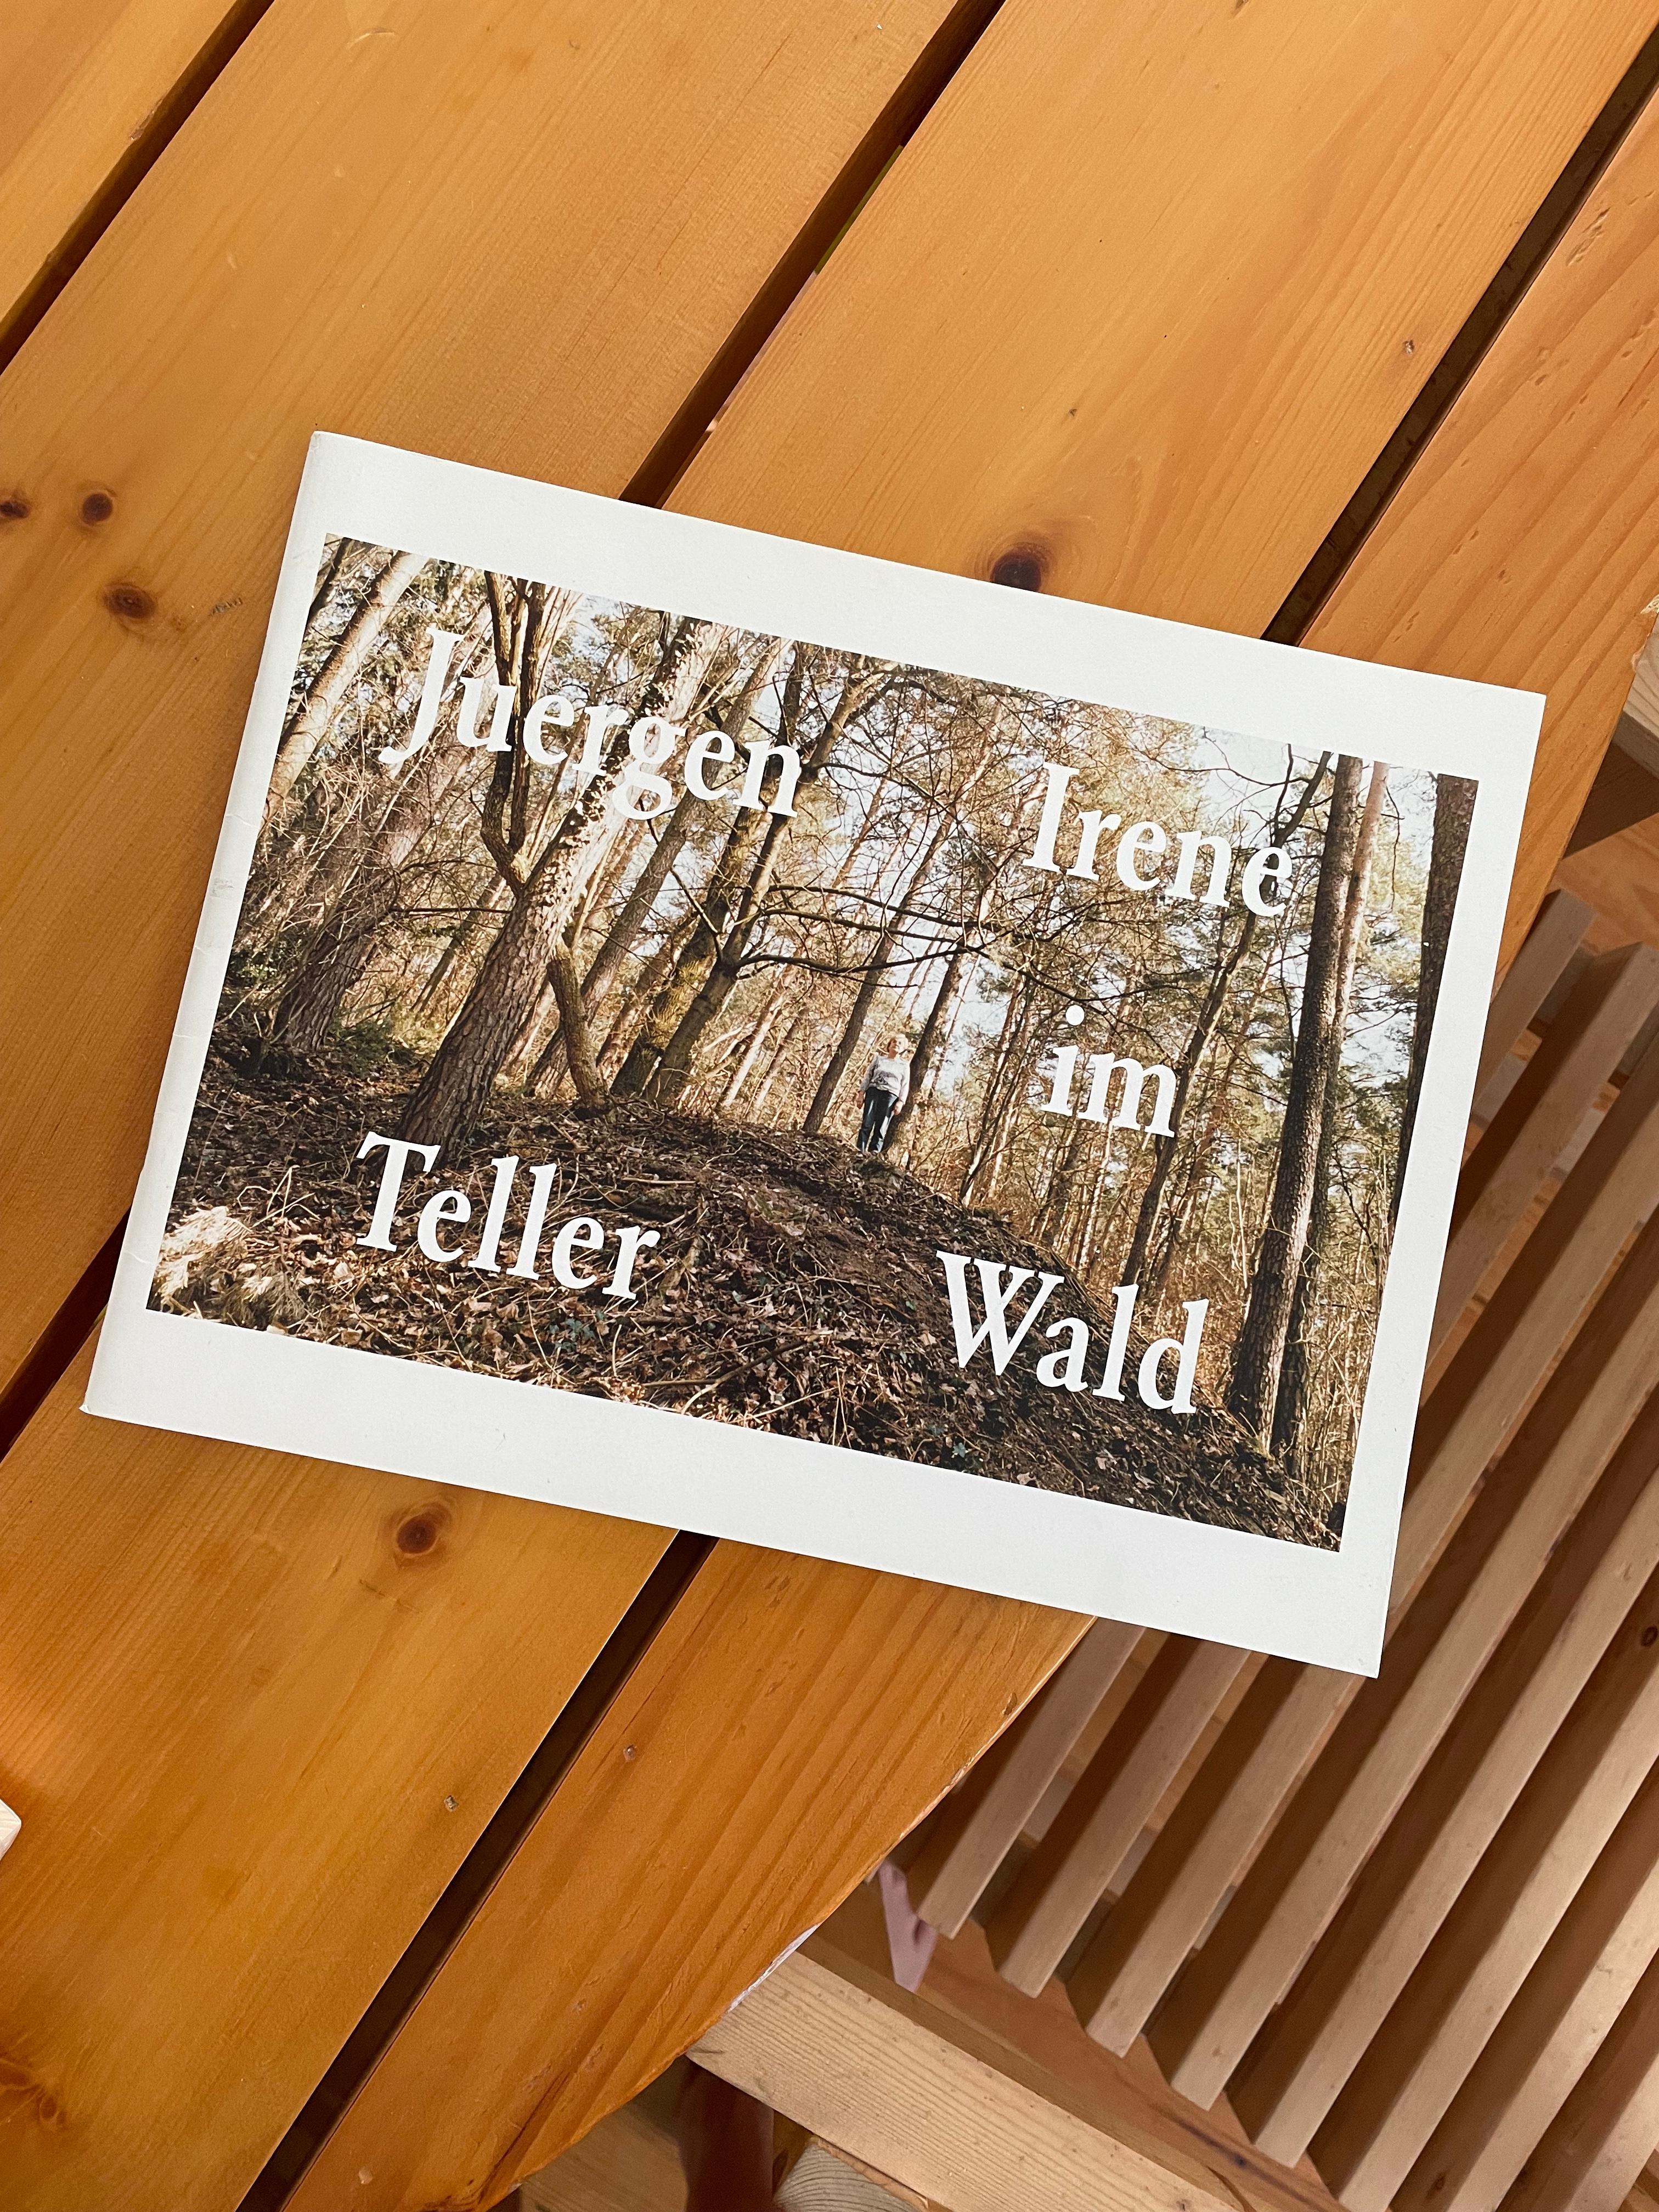 Excellent first-edition paperback book of The Journal Gallery's Irene im Wald exhibition. Juergen Teller took photos of his mom, Irene, in forests that surrounded the house he grew up in outside Nuremberg, Germany in his signature style.  With